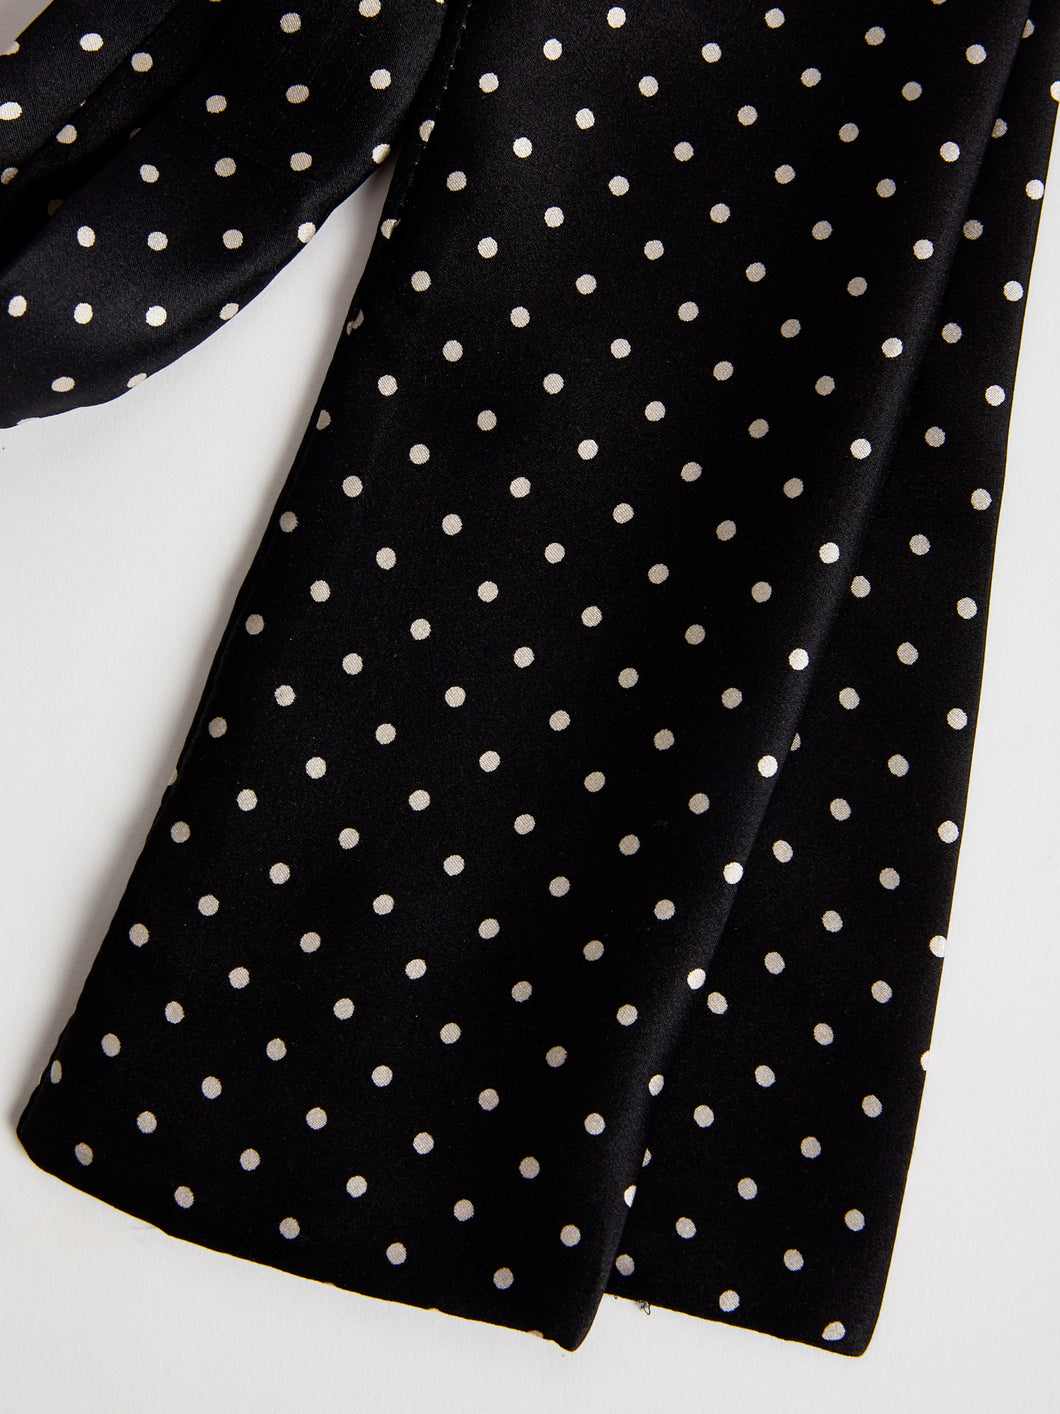 Silk Scarf by The Arc -Black and White Microdot